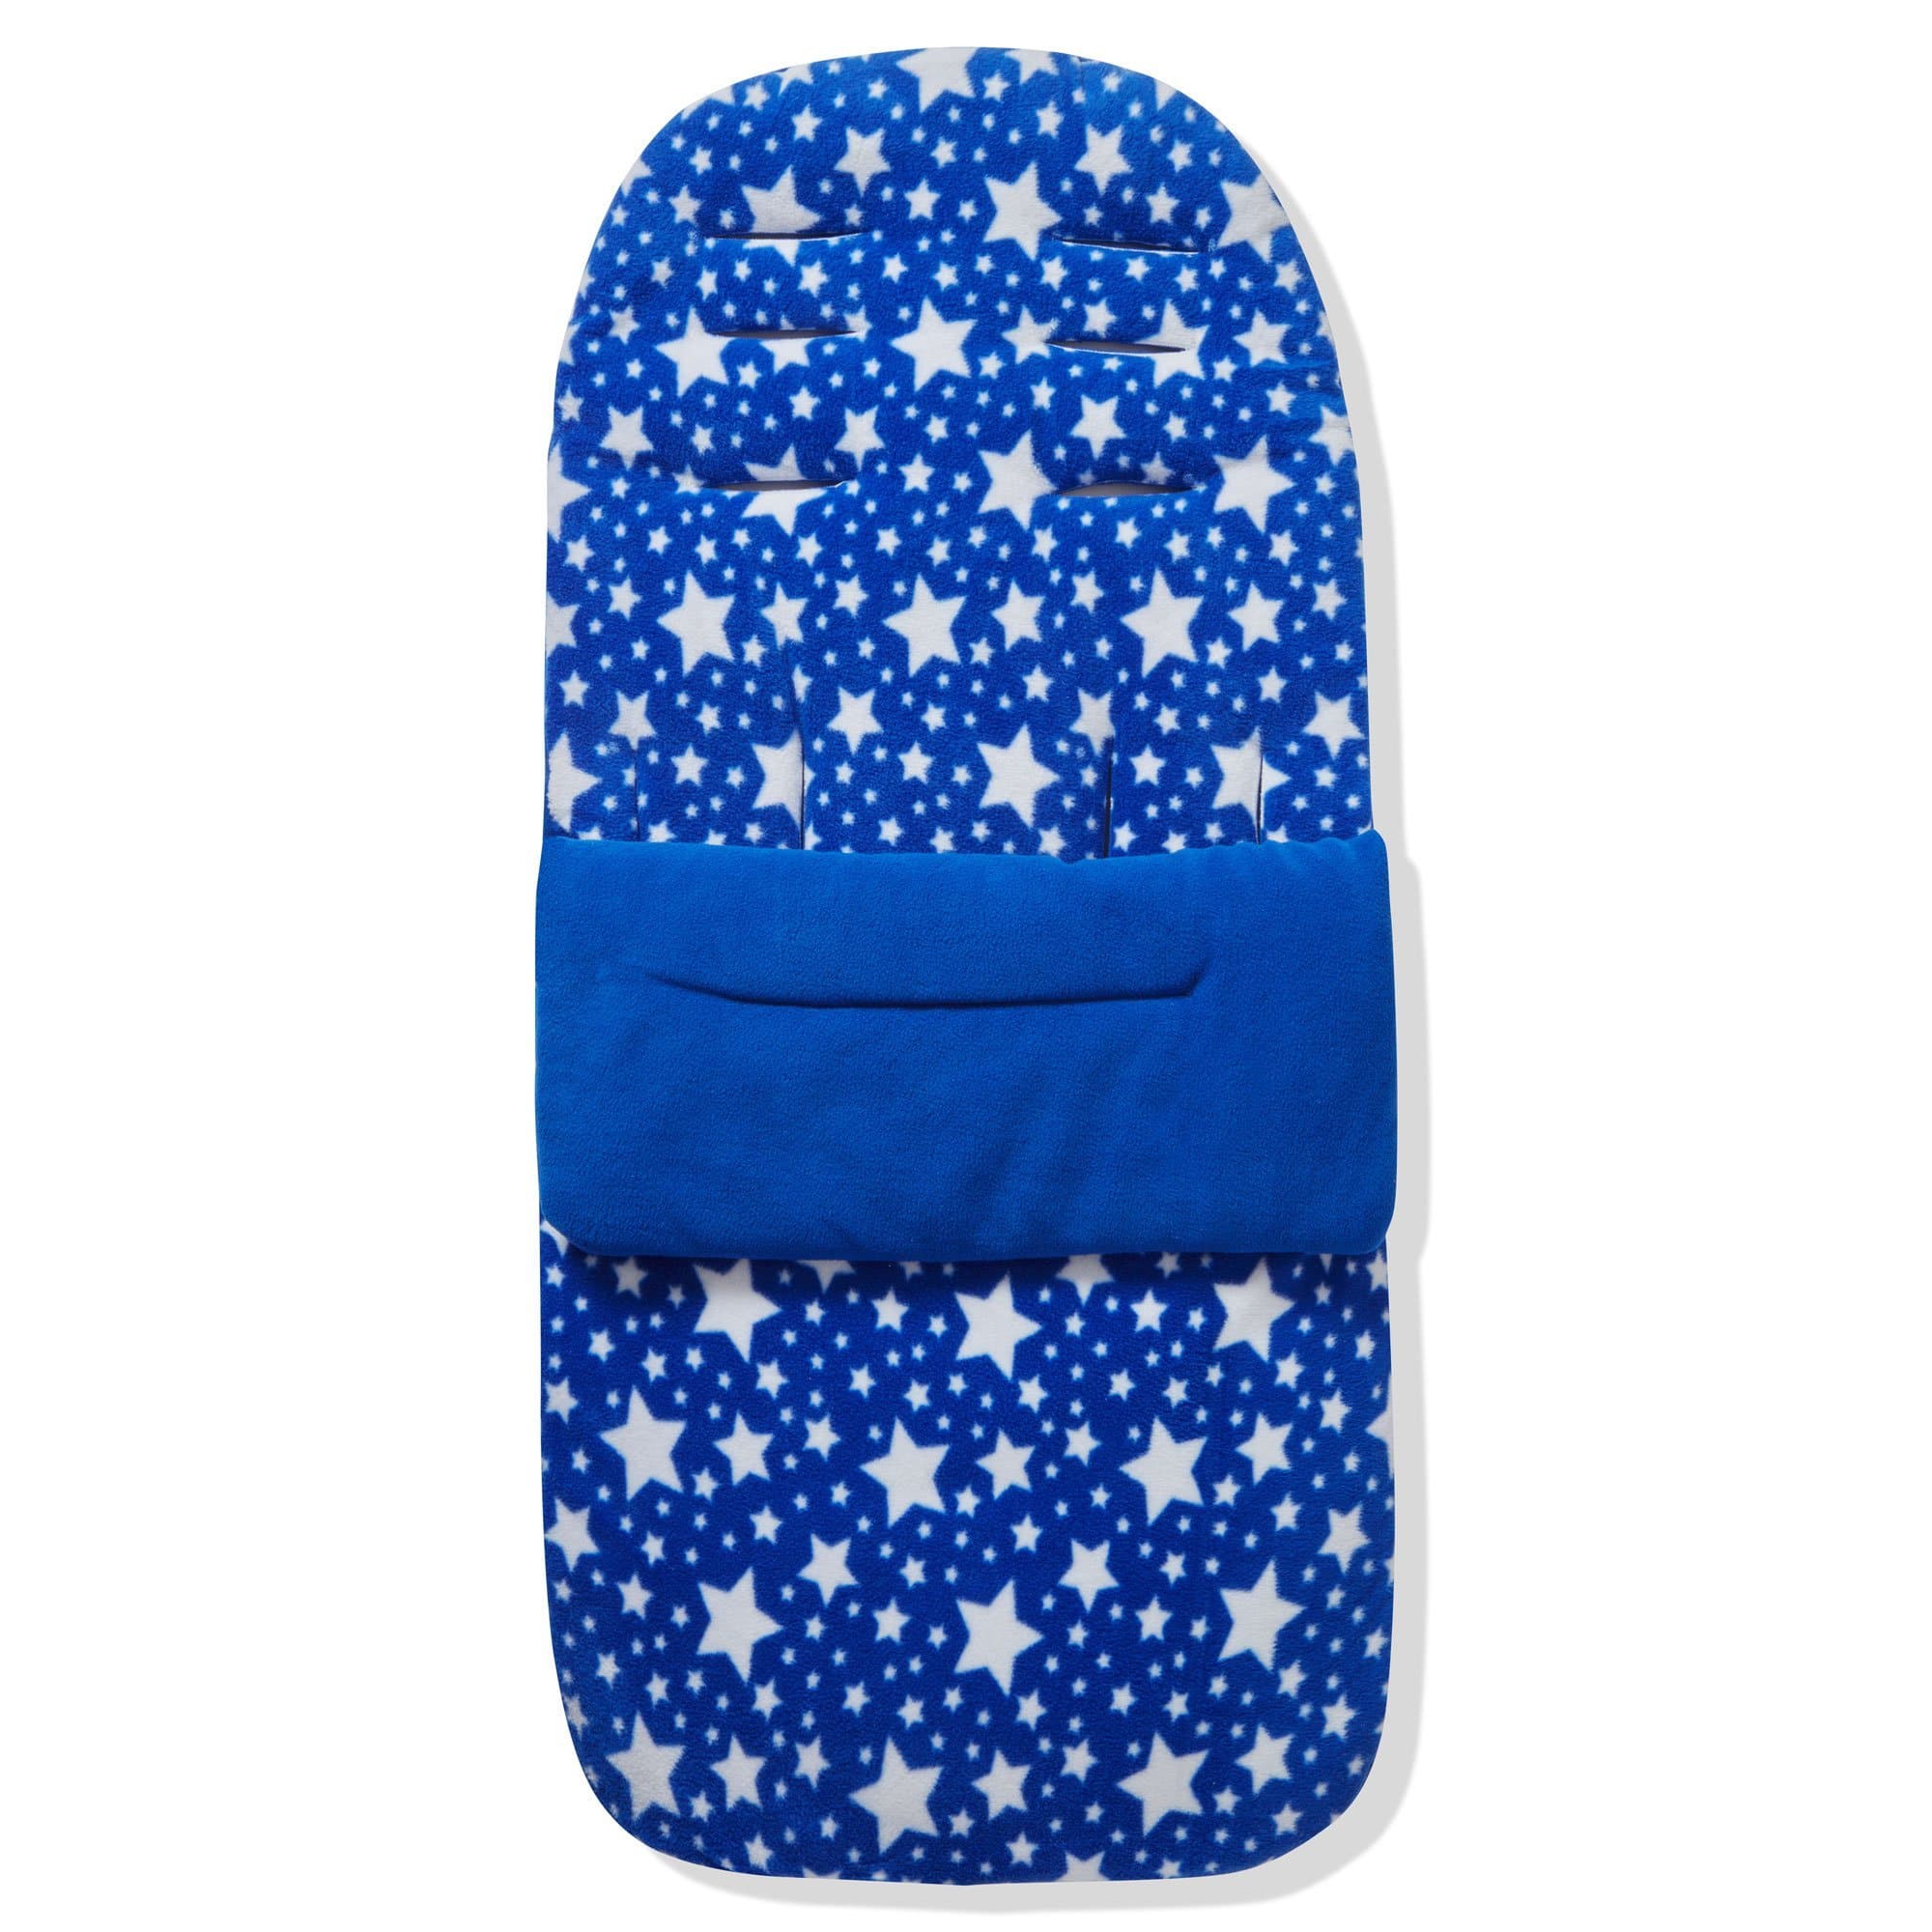 Fleece Footmuff / Cosy Toes Compatible With Bugaboo - Blue Star / Fits All Models | For Your Little One